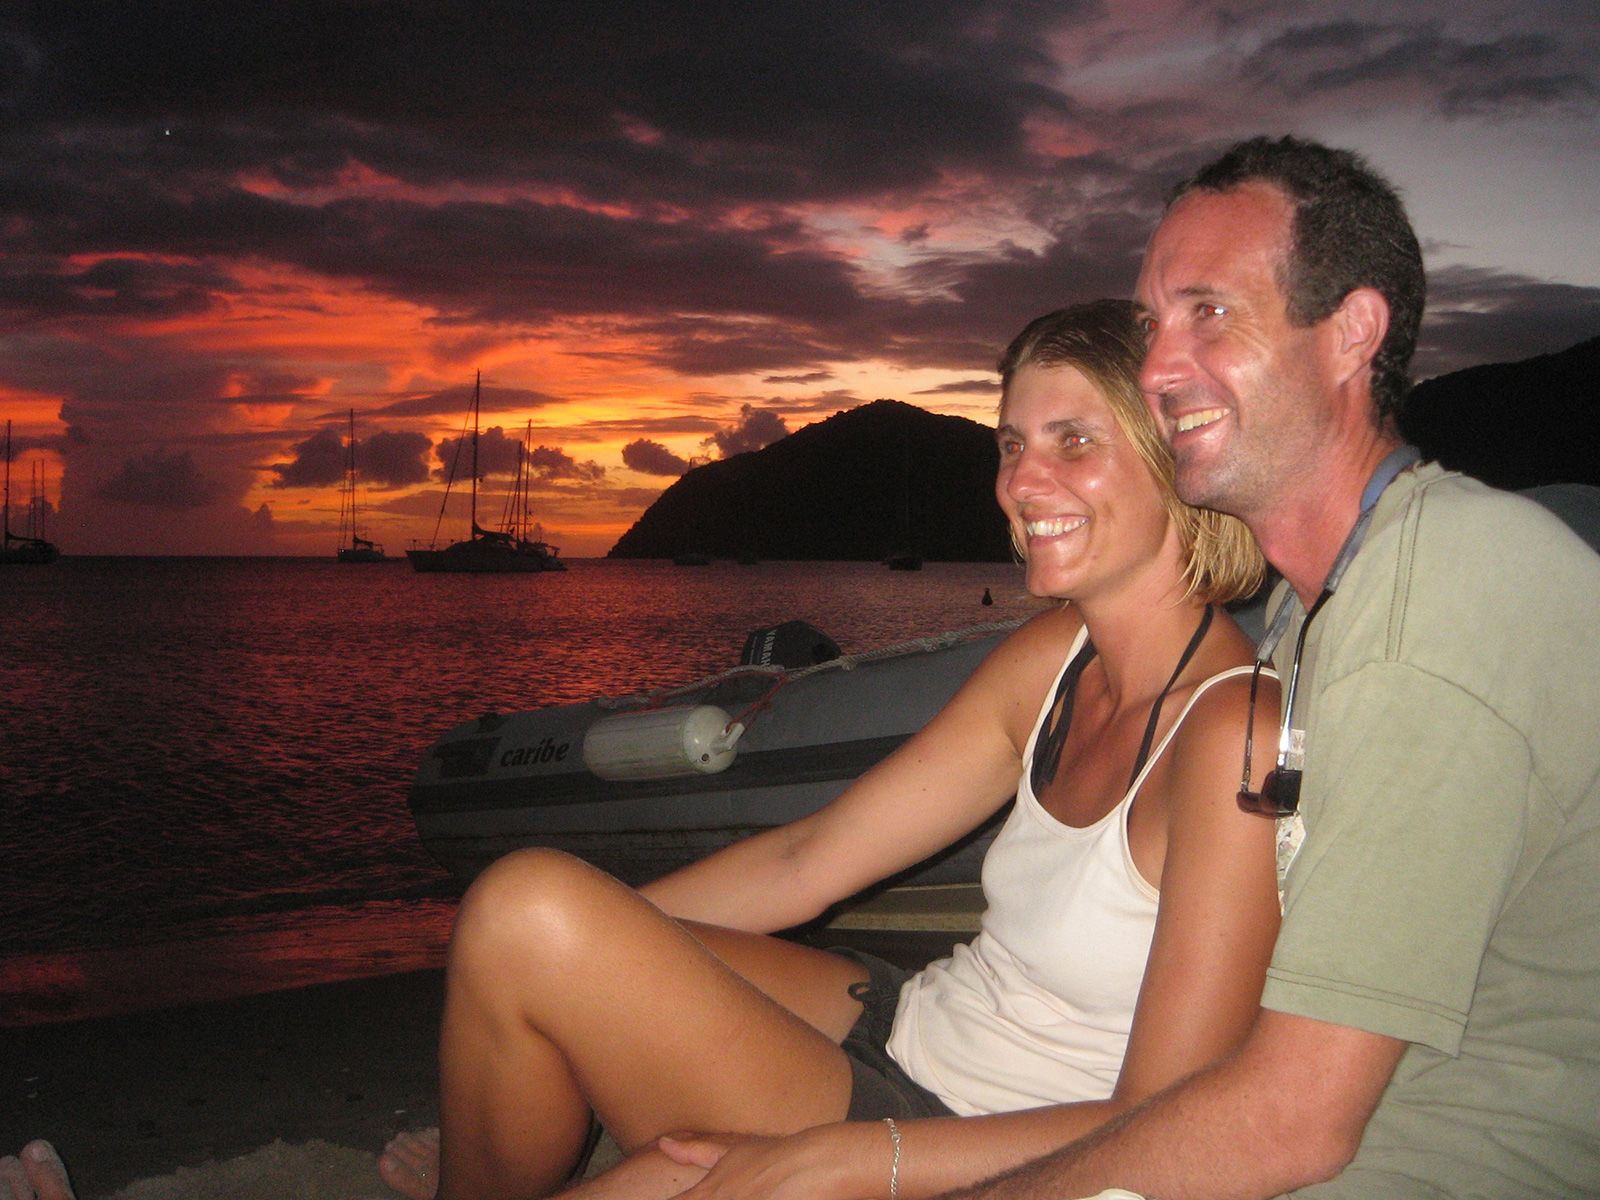 Liesbet made a spontaenous decision to stay with Mark. Here's the couple pictured at sunset on a beach in Martinique.